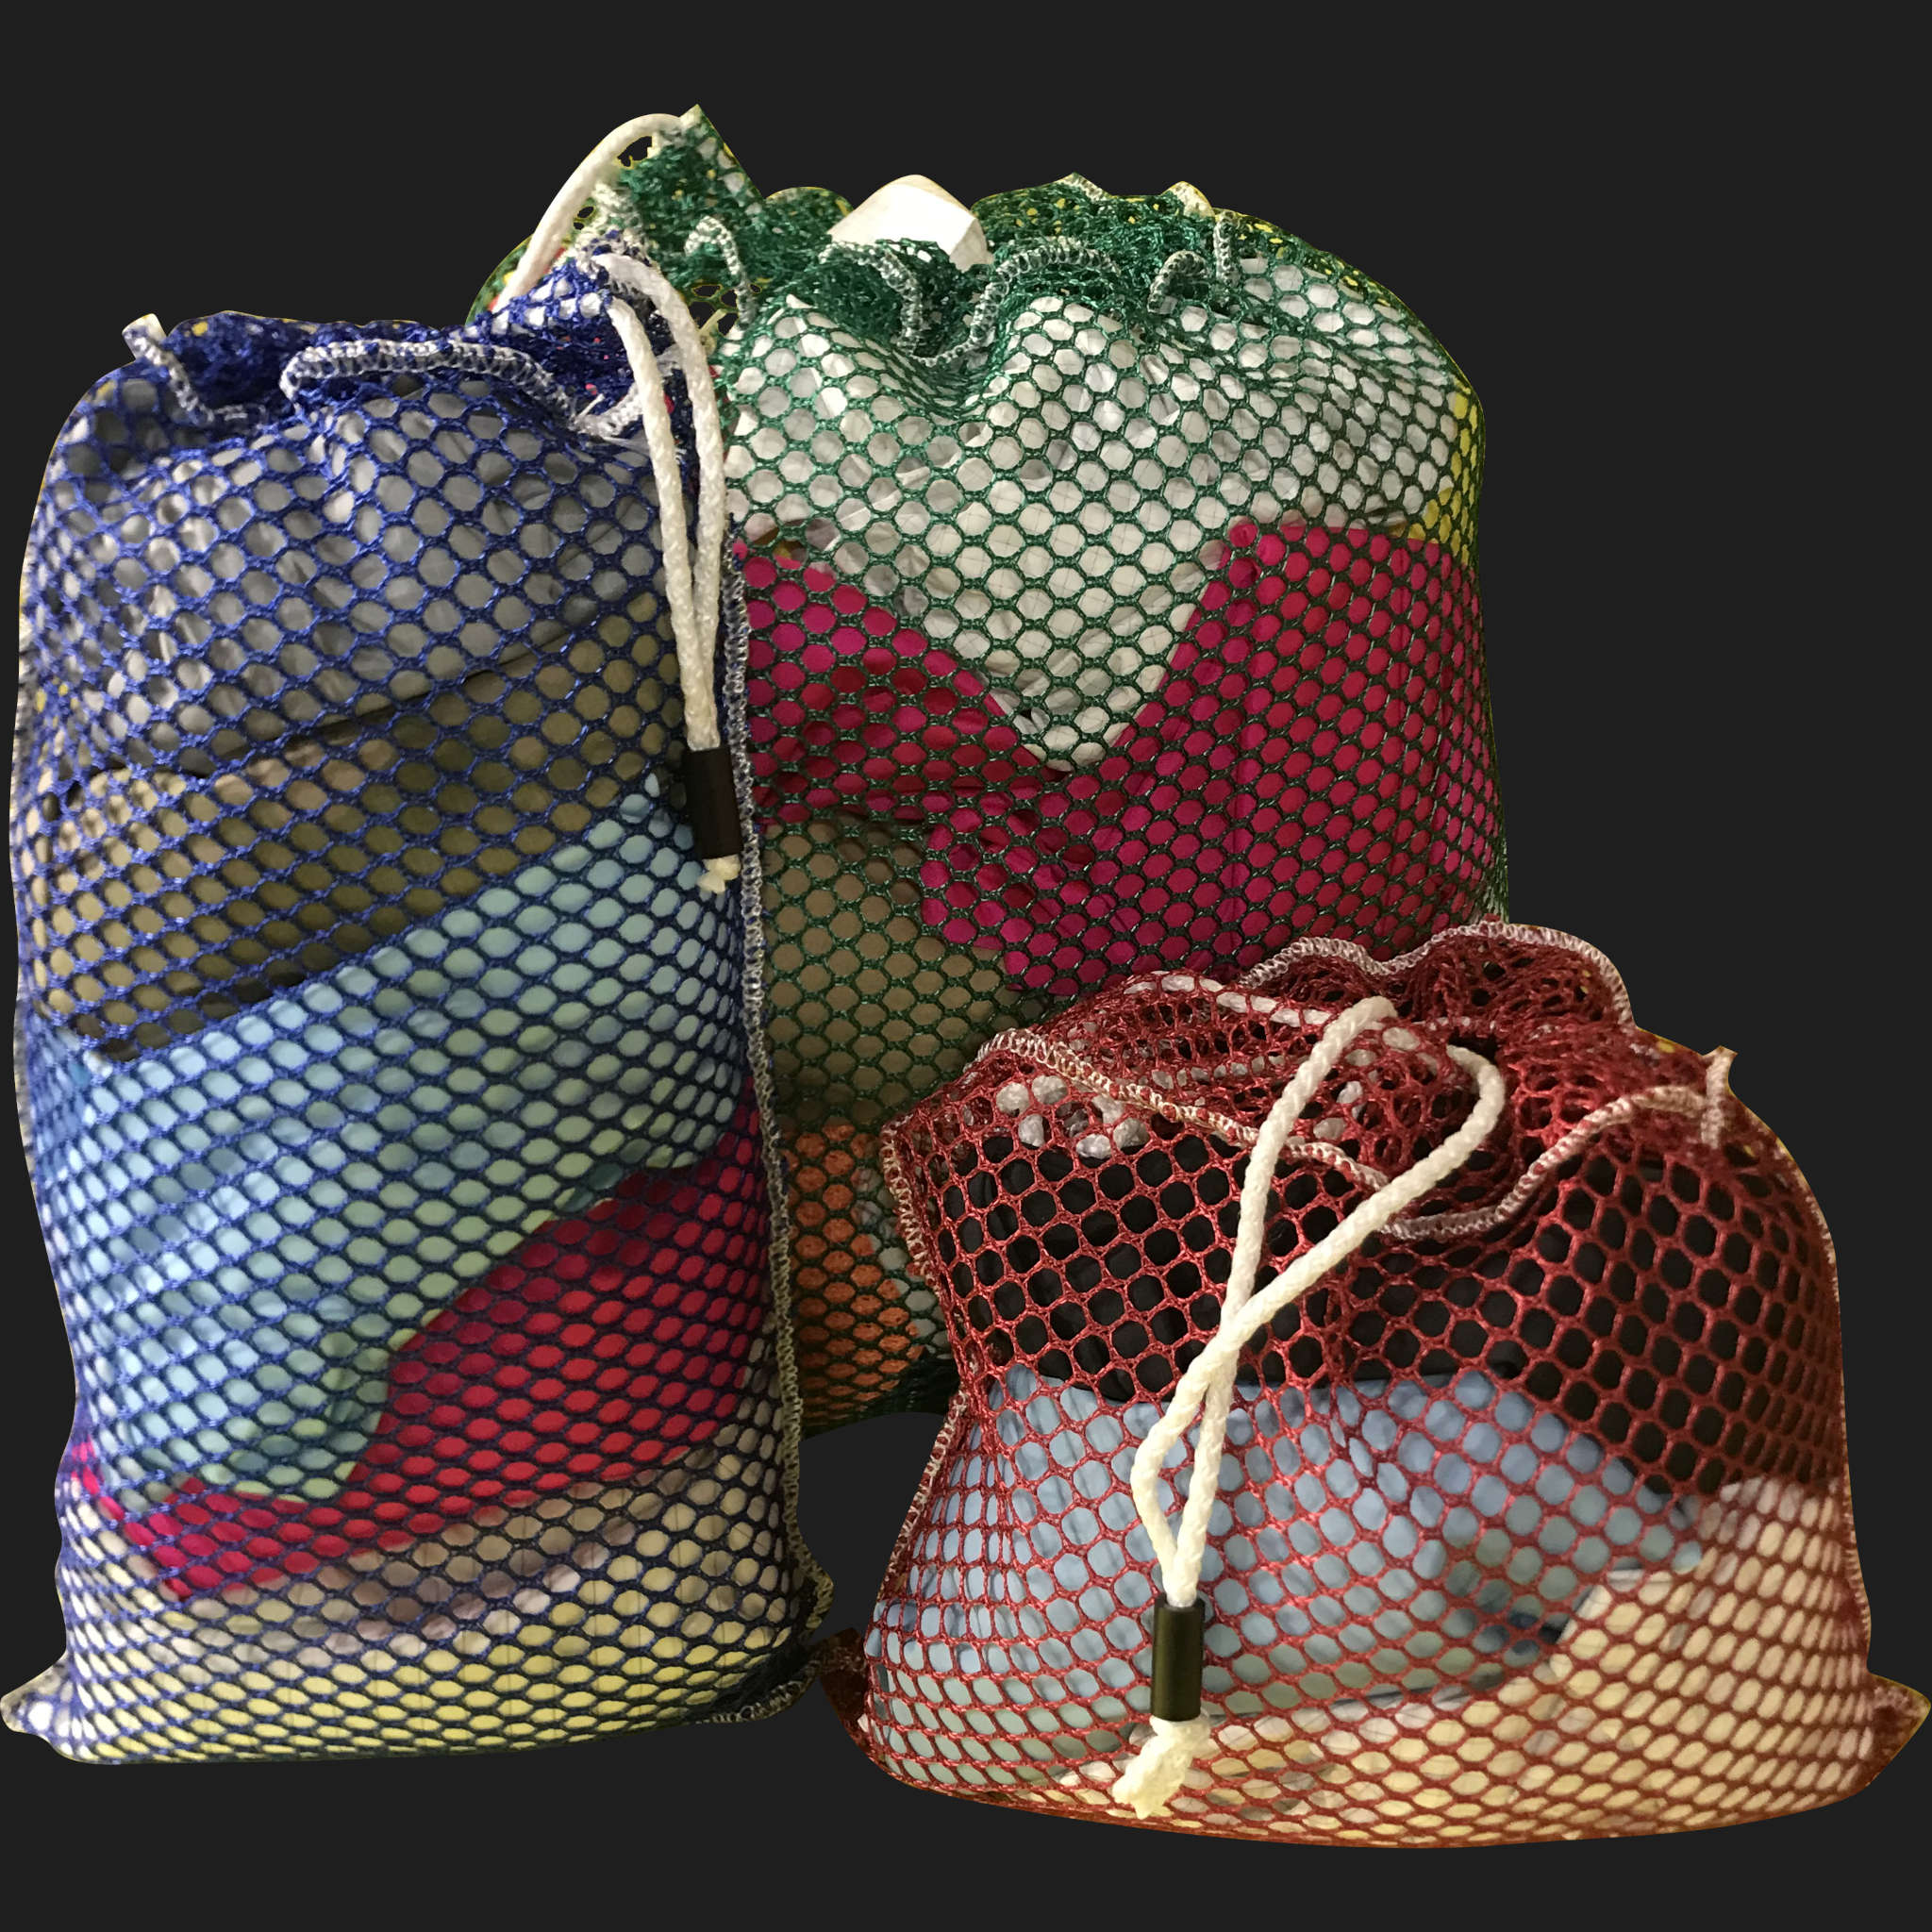 48" x 62" Customized Mesh-Net-Laundry Bags Heavy Duty with Cord and barrellock closure